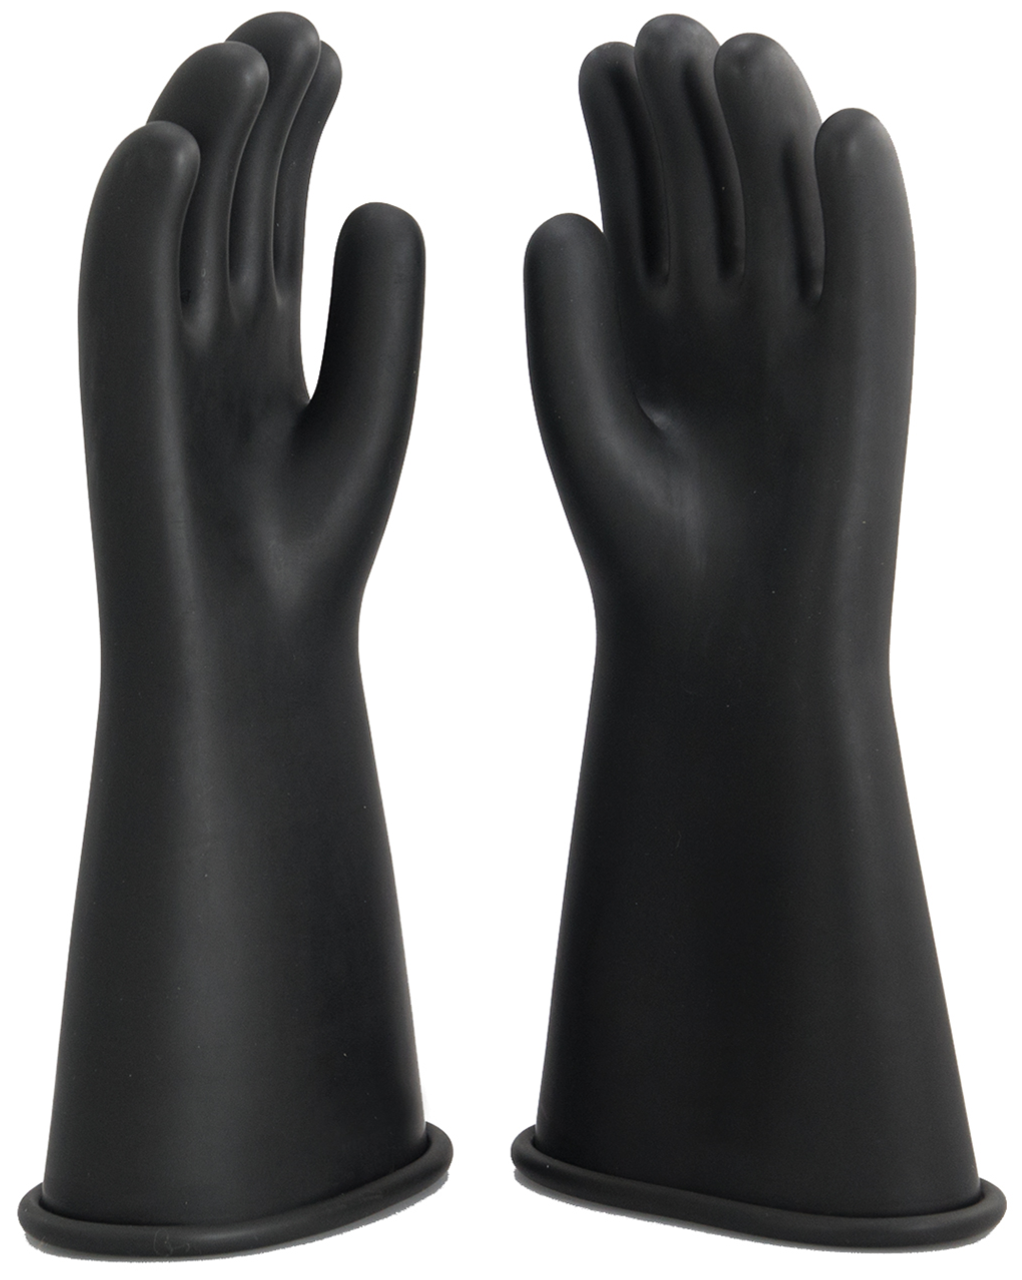 Rubber Electrical Gloves - 12